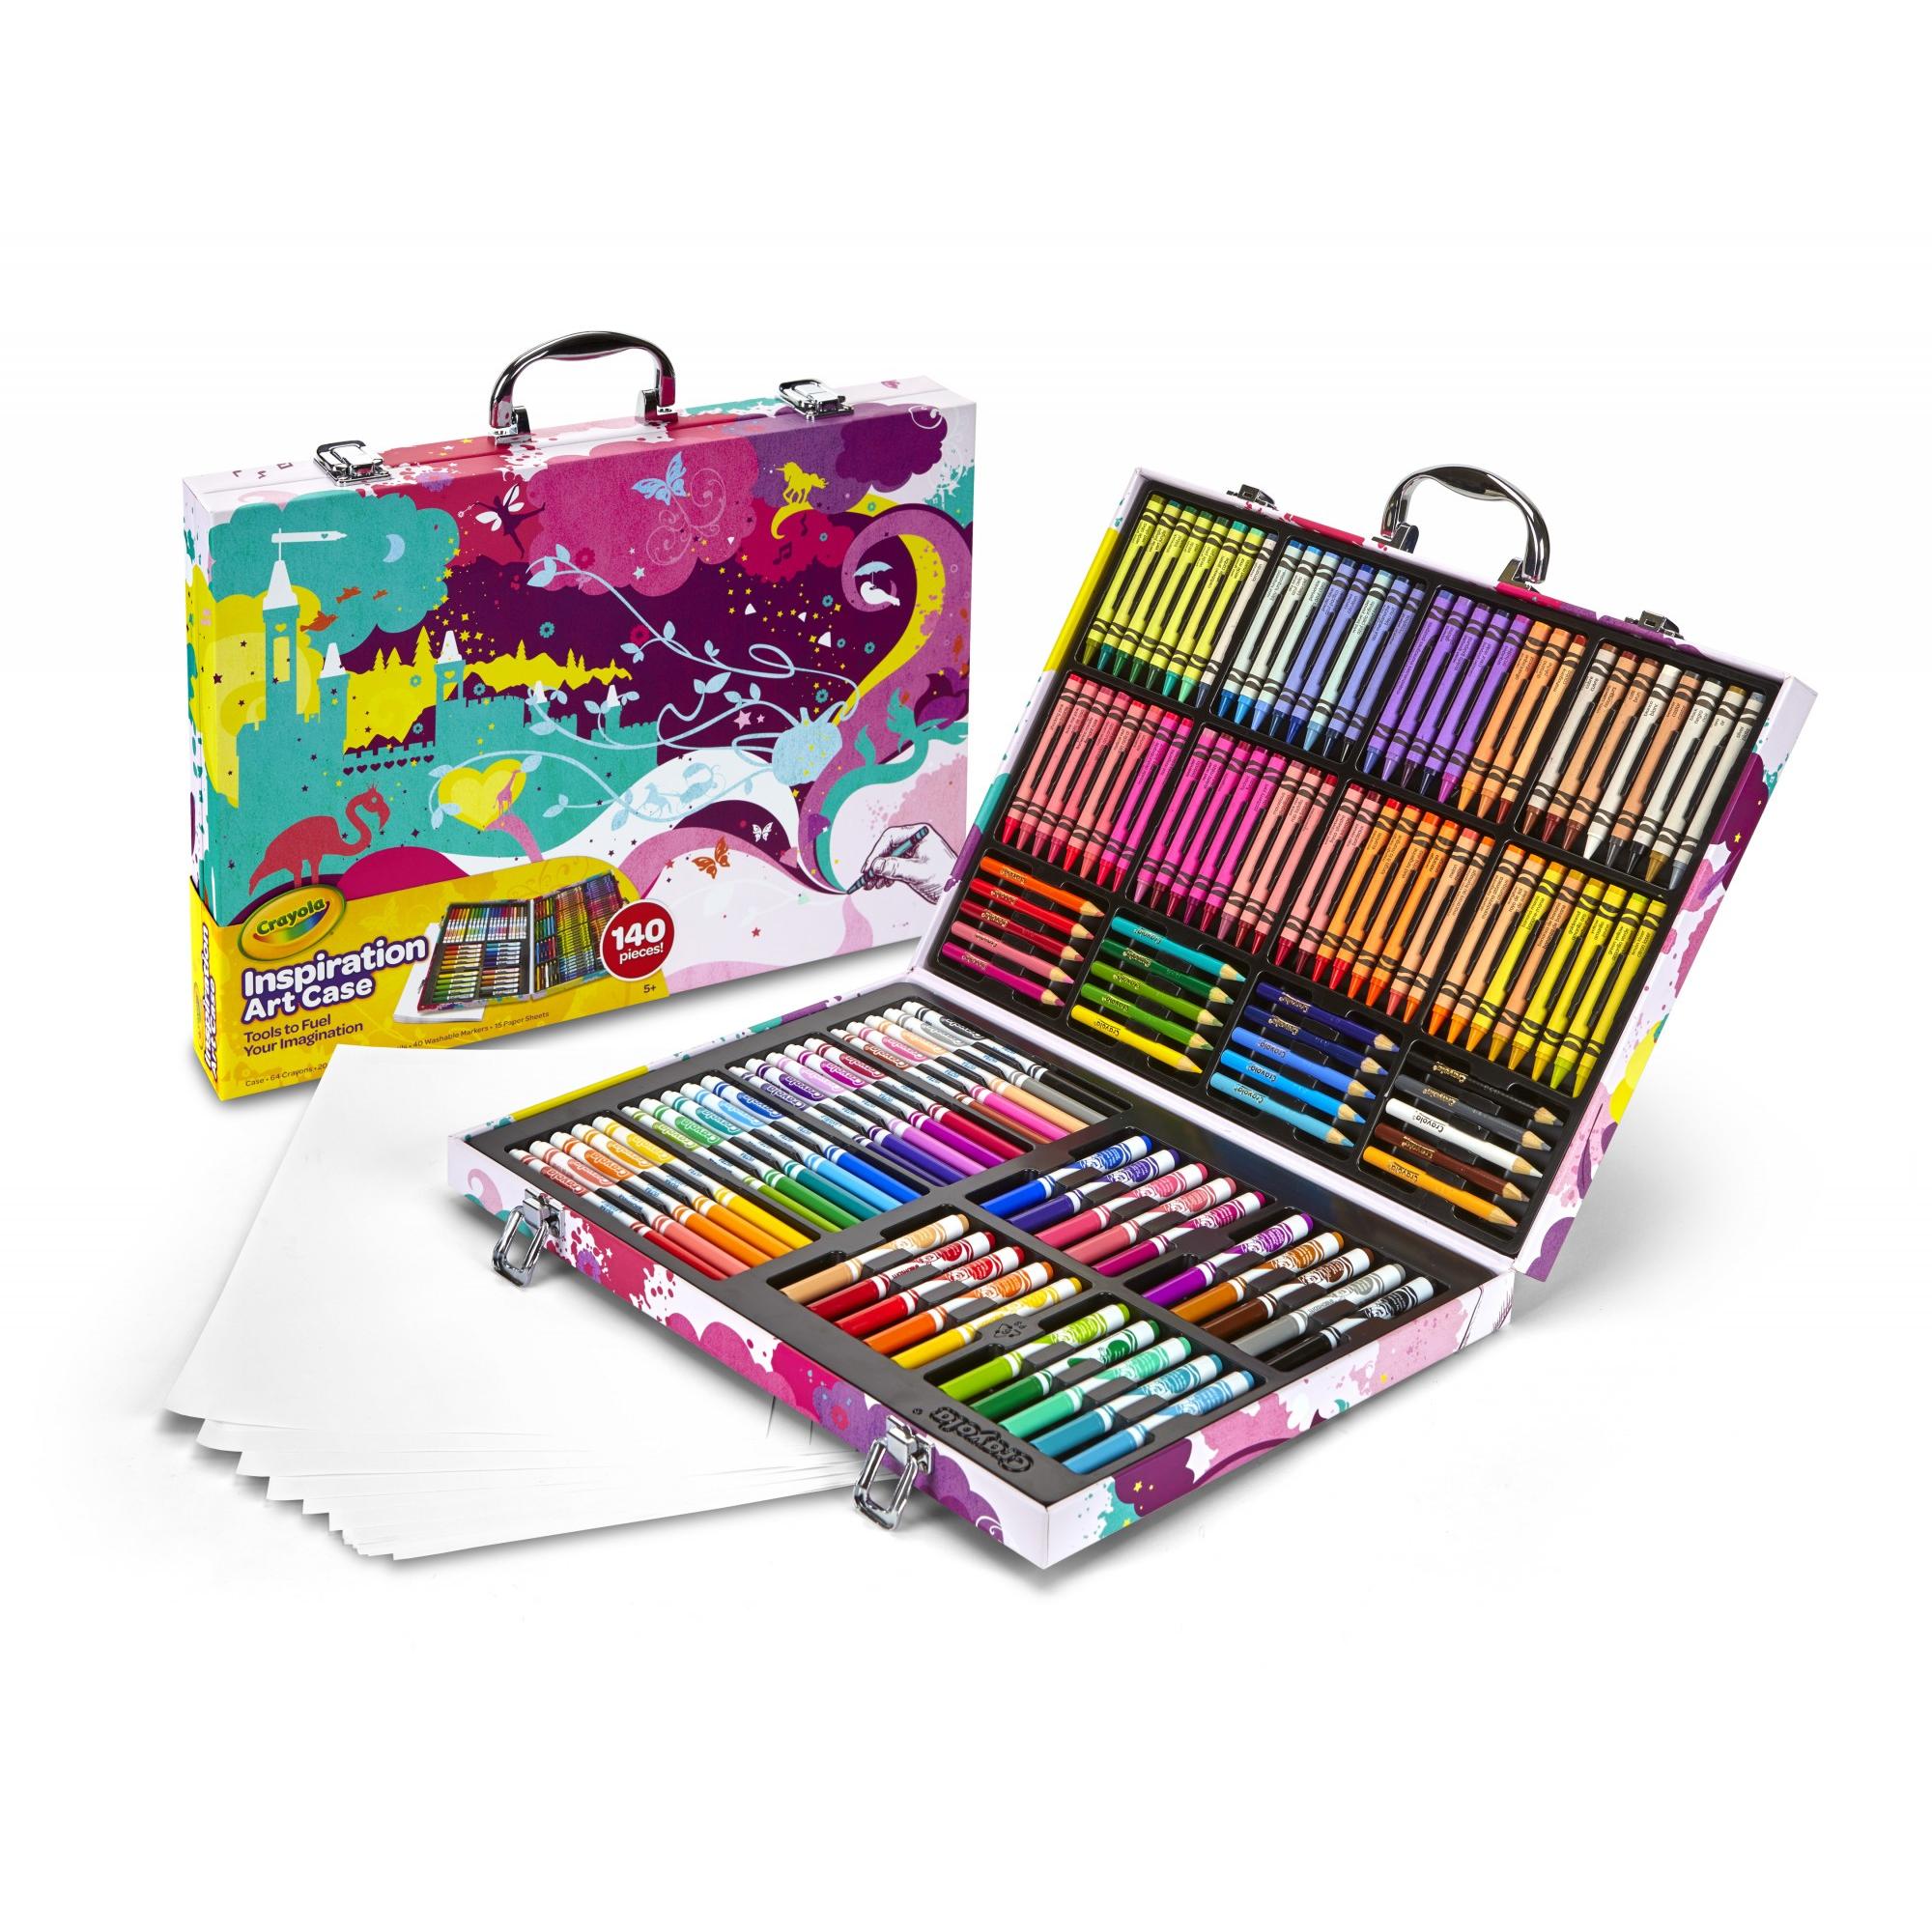 Crayola Inspiration Art Case, Pink, Art Supplies, Gift For Kids, 140 Pieces - image 3 of 11